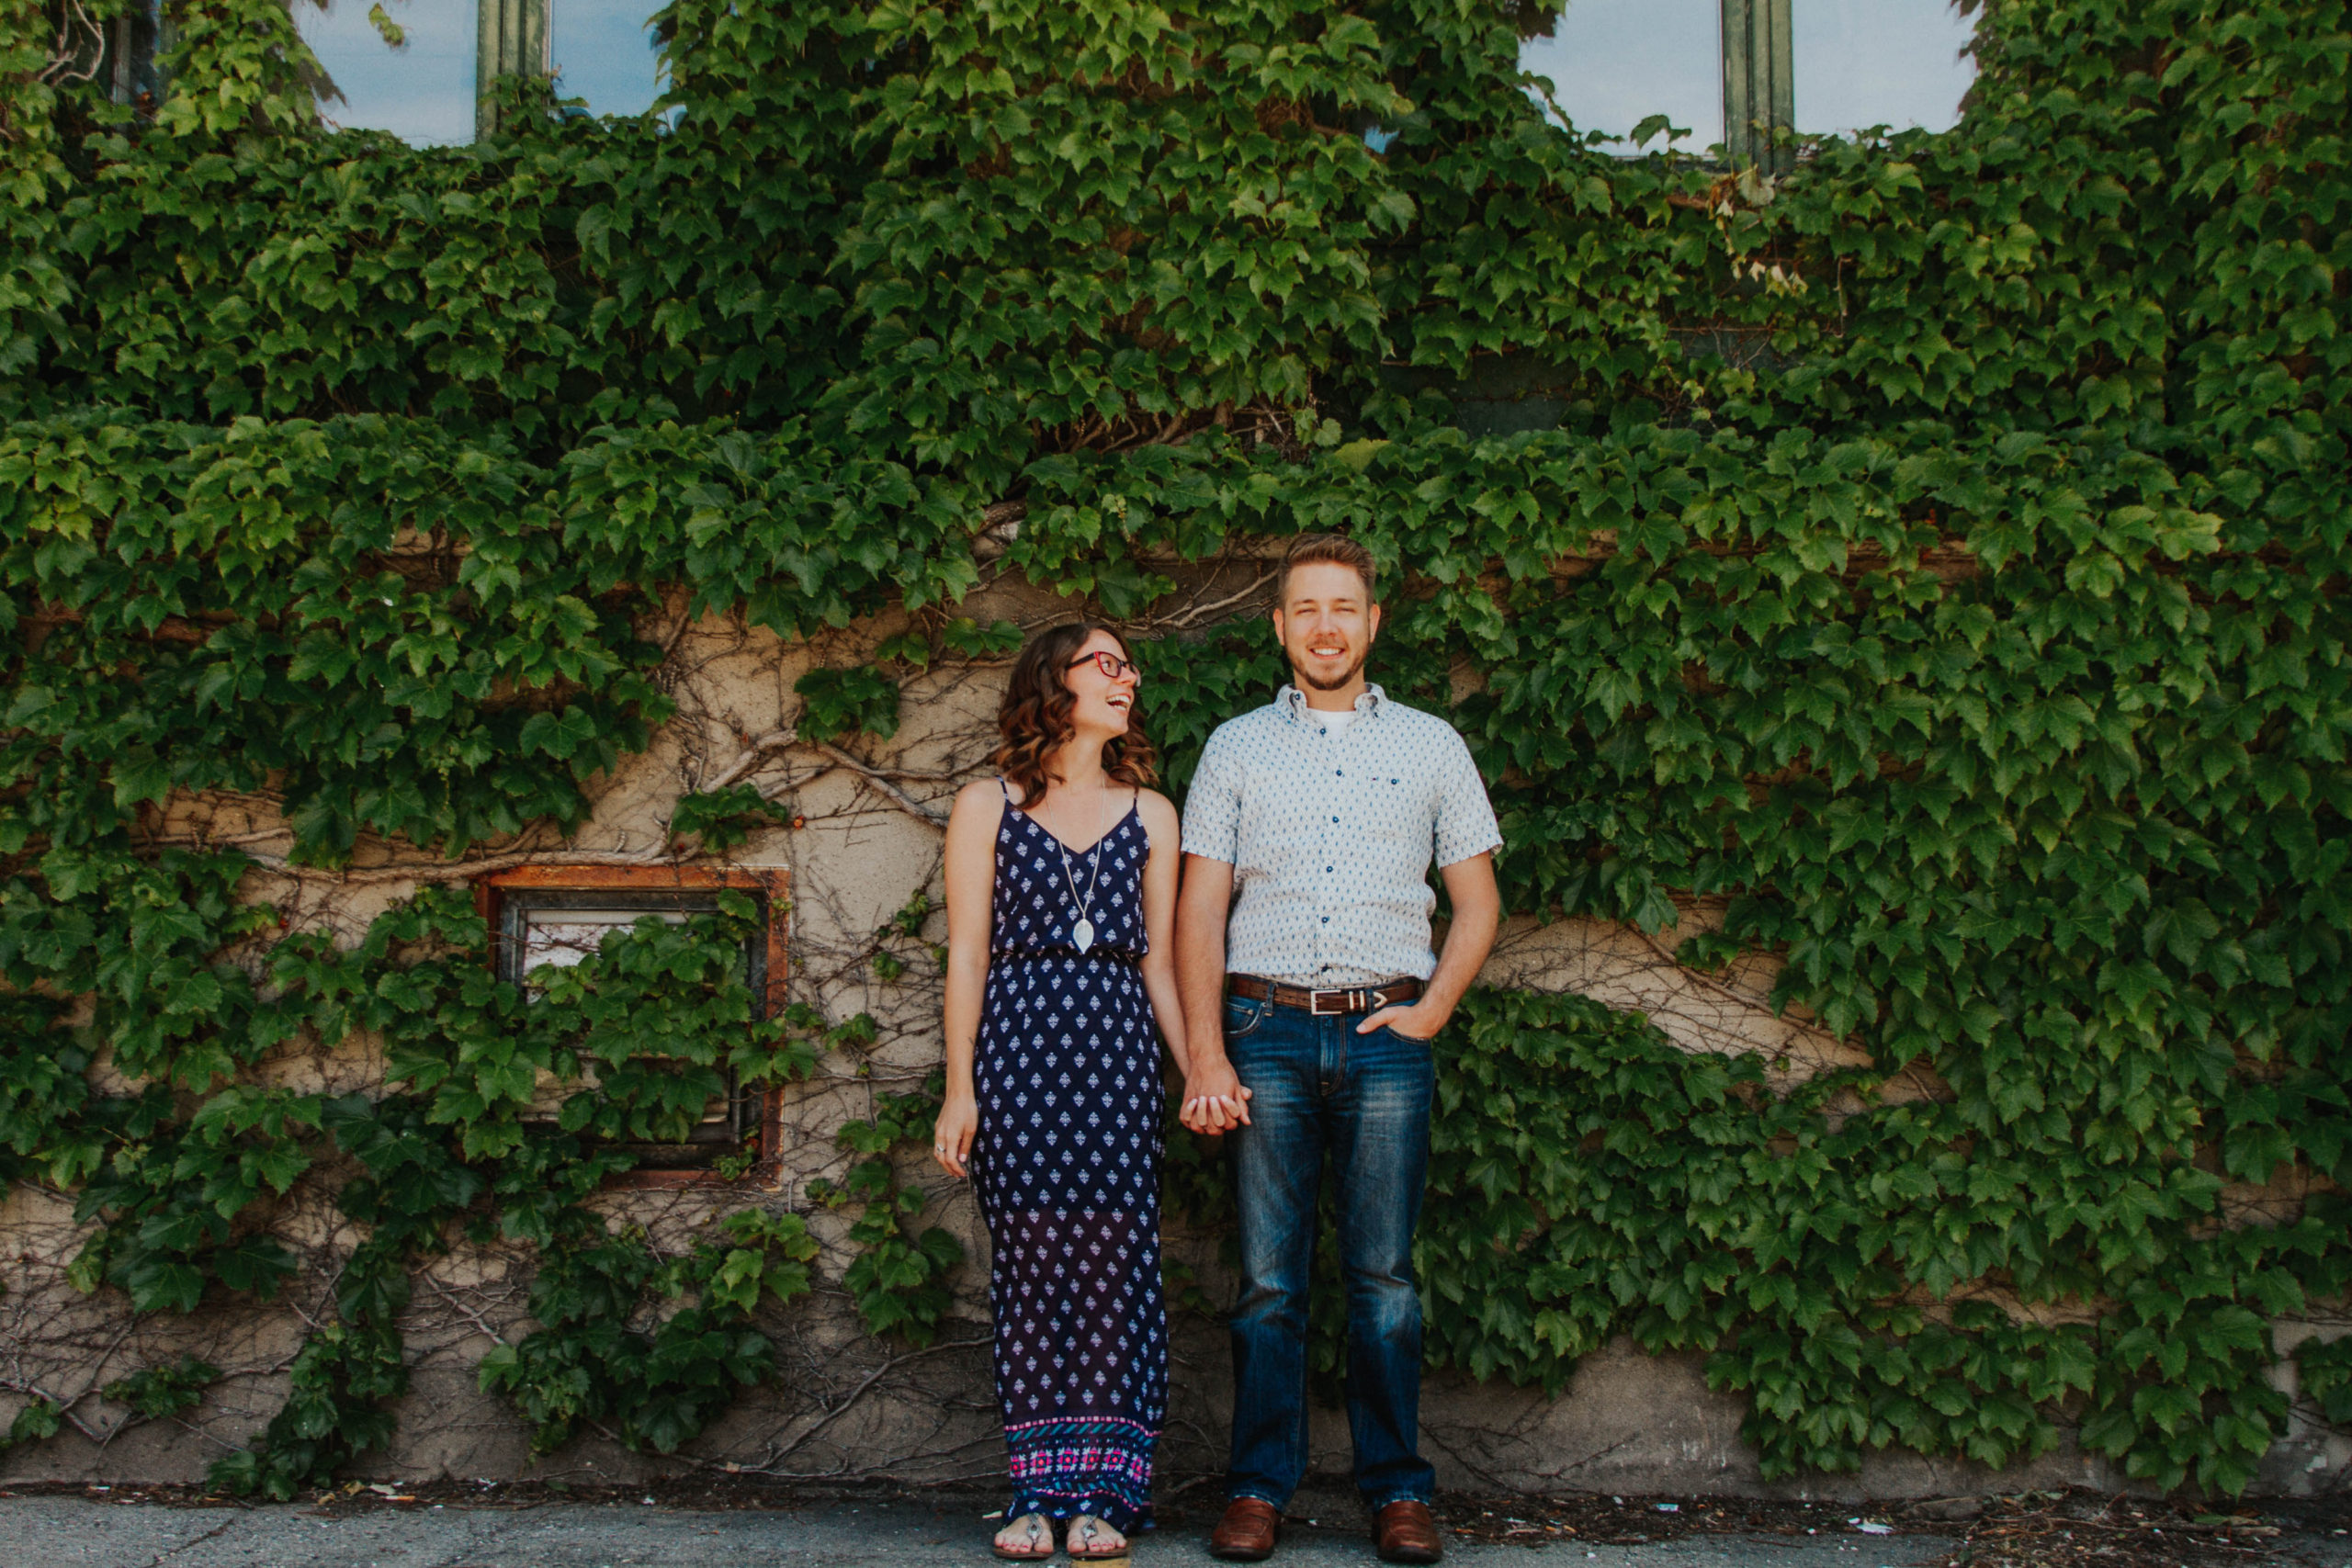 Downtown Flint Engagement Photography with Ivy Wall